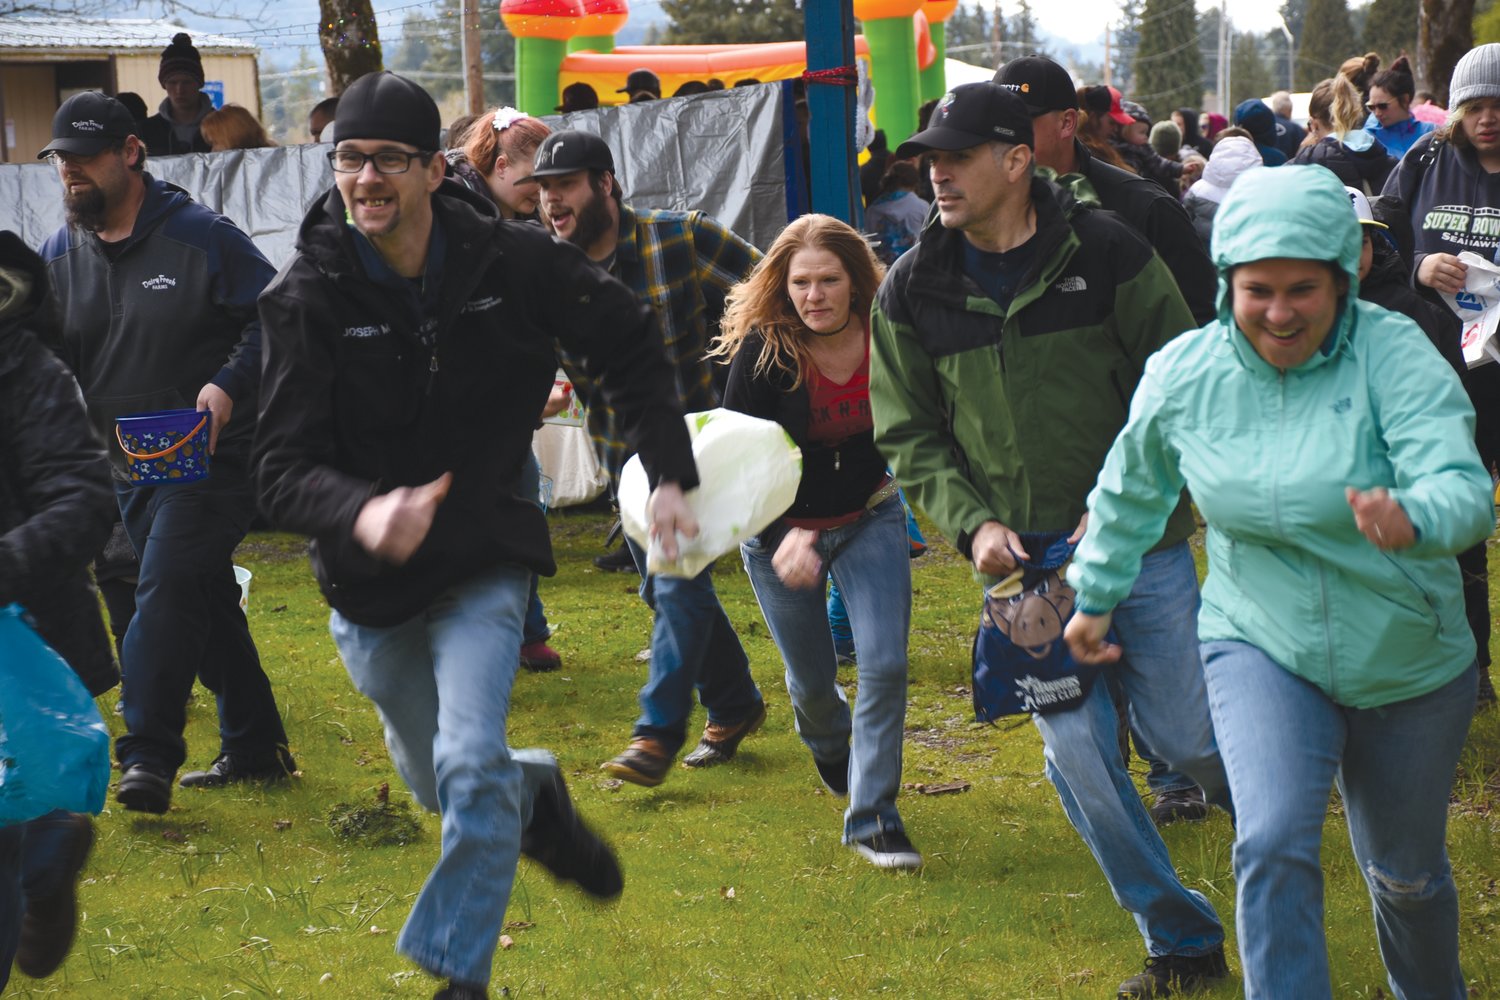 Rainier-area residents compete in a special adult Easter egg hunt on Saturday at Wilkowski Park.